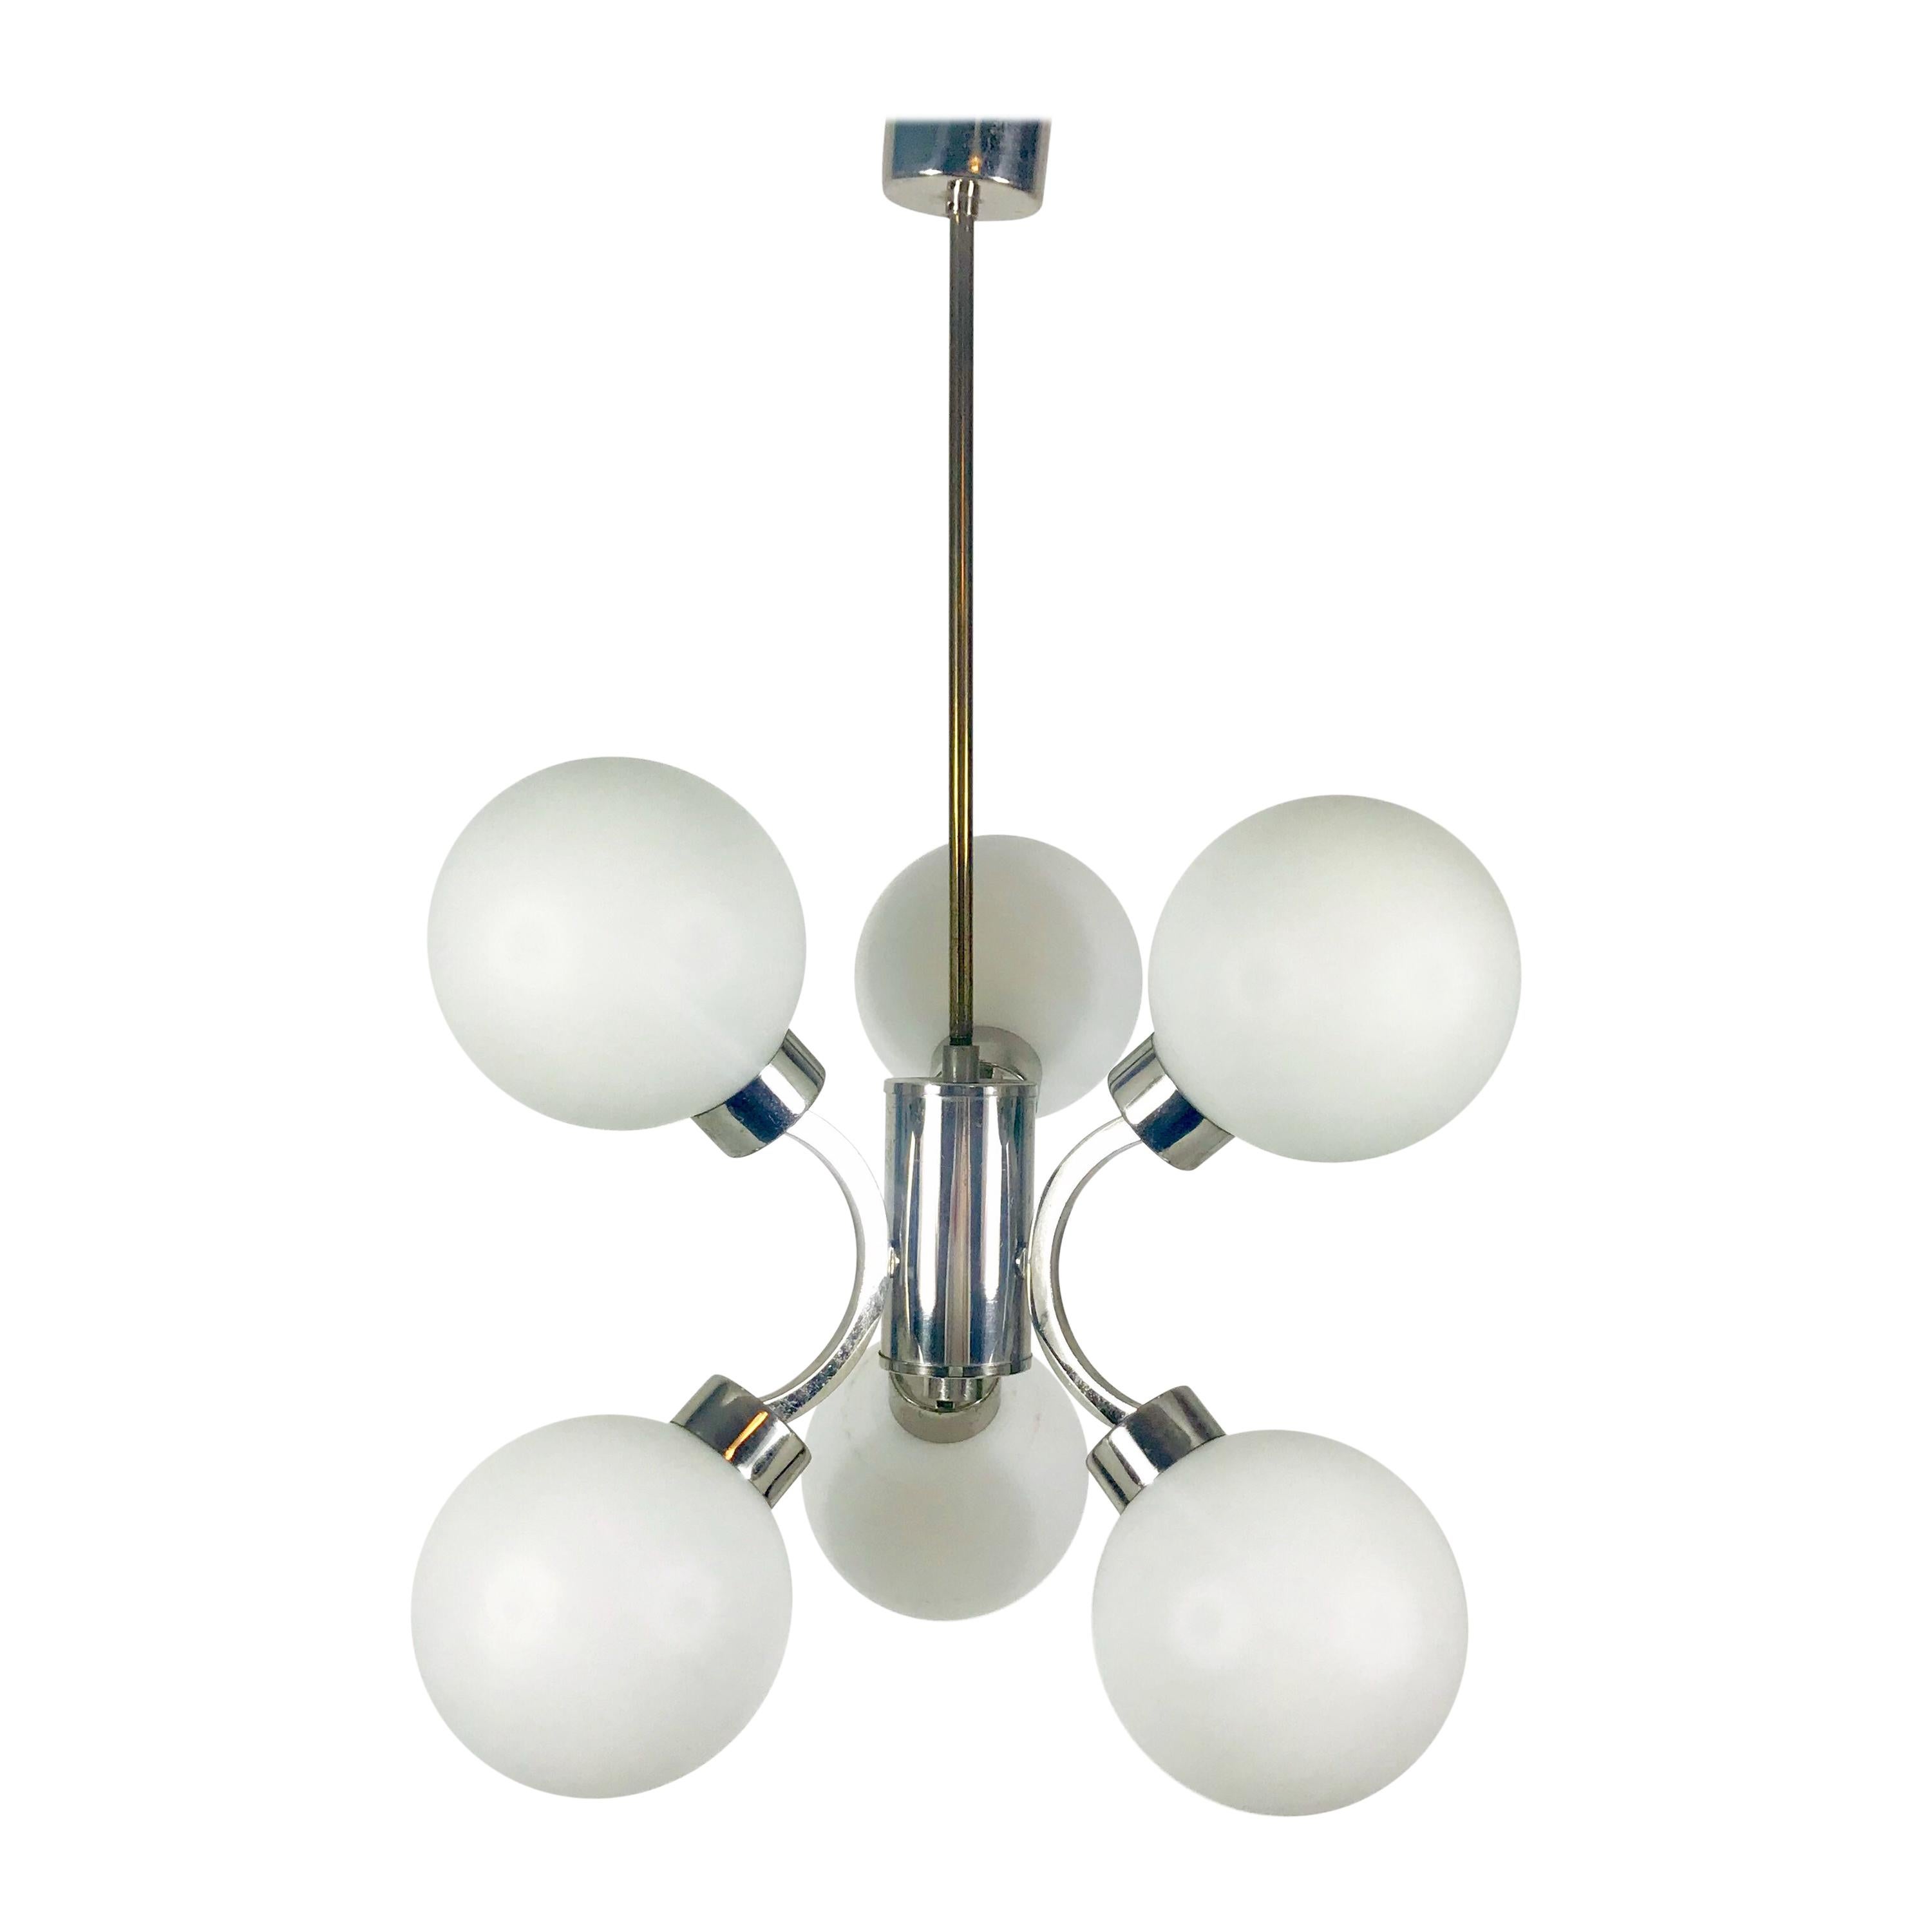 Mid-Century Modern Chrome Kaiser 6-Arm Space Age Chandelier, 1960s, Germany For Sale